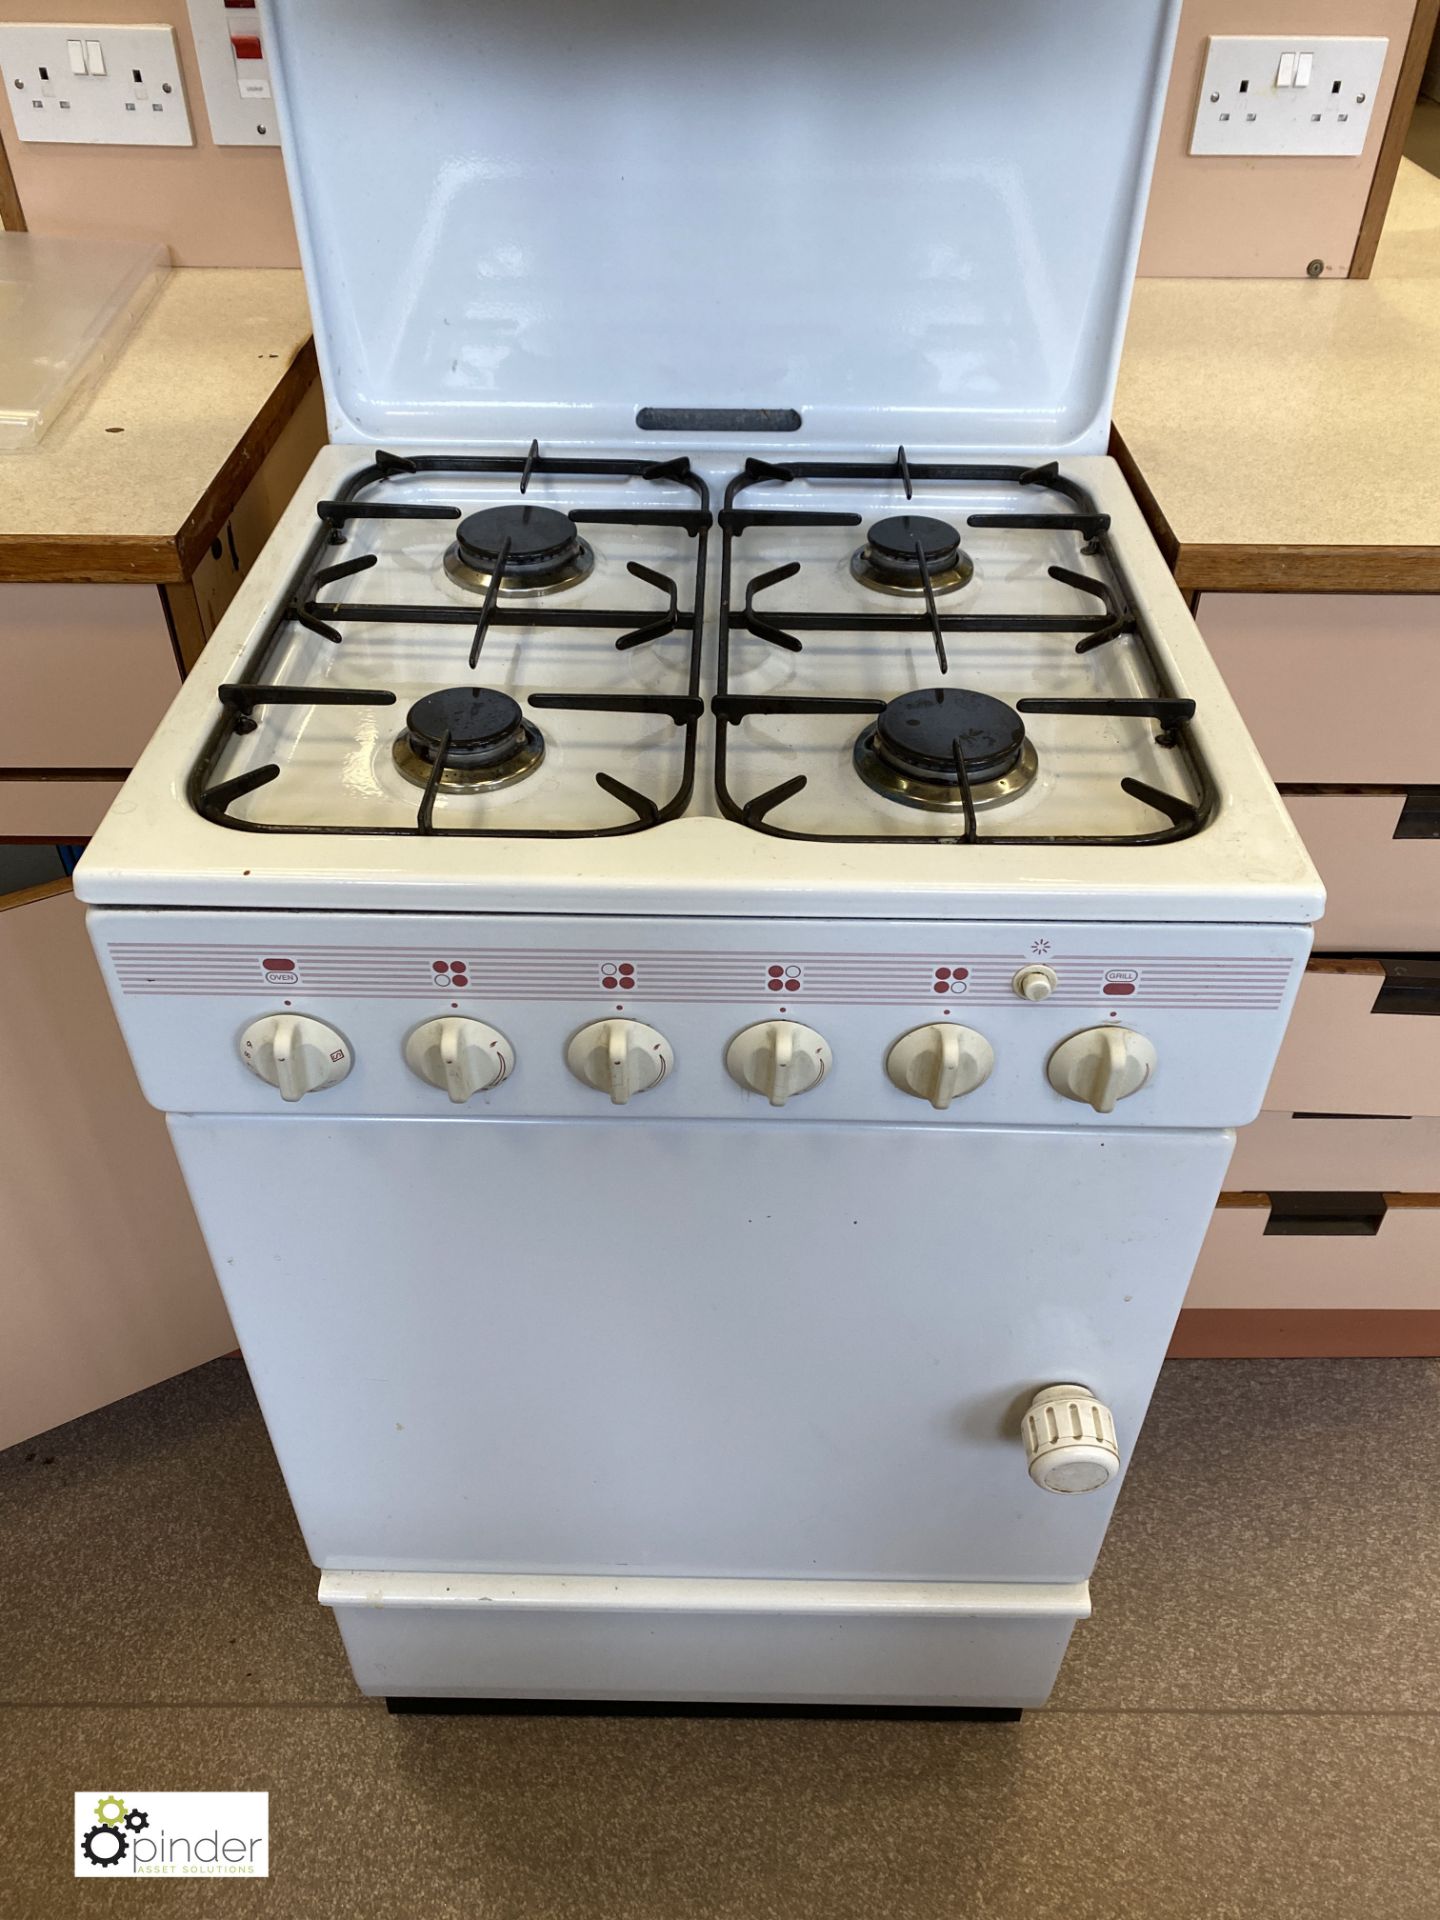 Leisure 2100 Sterling 4-ring Gas Oven and Grill (location: Level 2, B276 Room) - Image 2 of 4